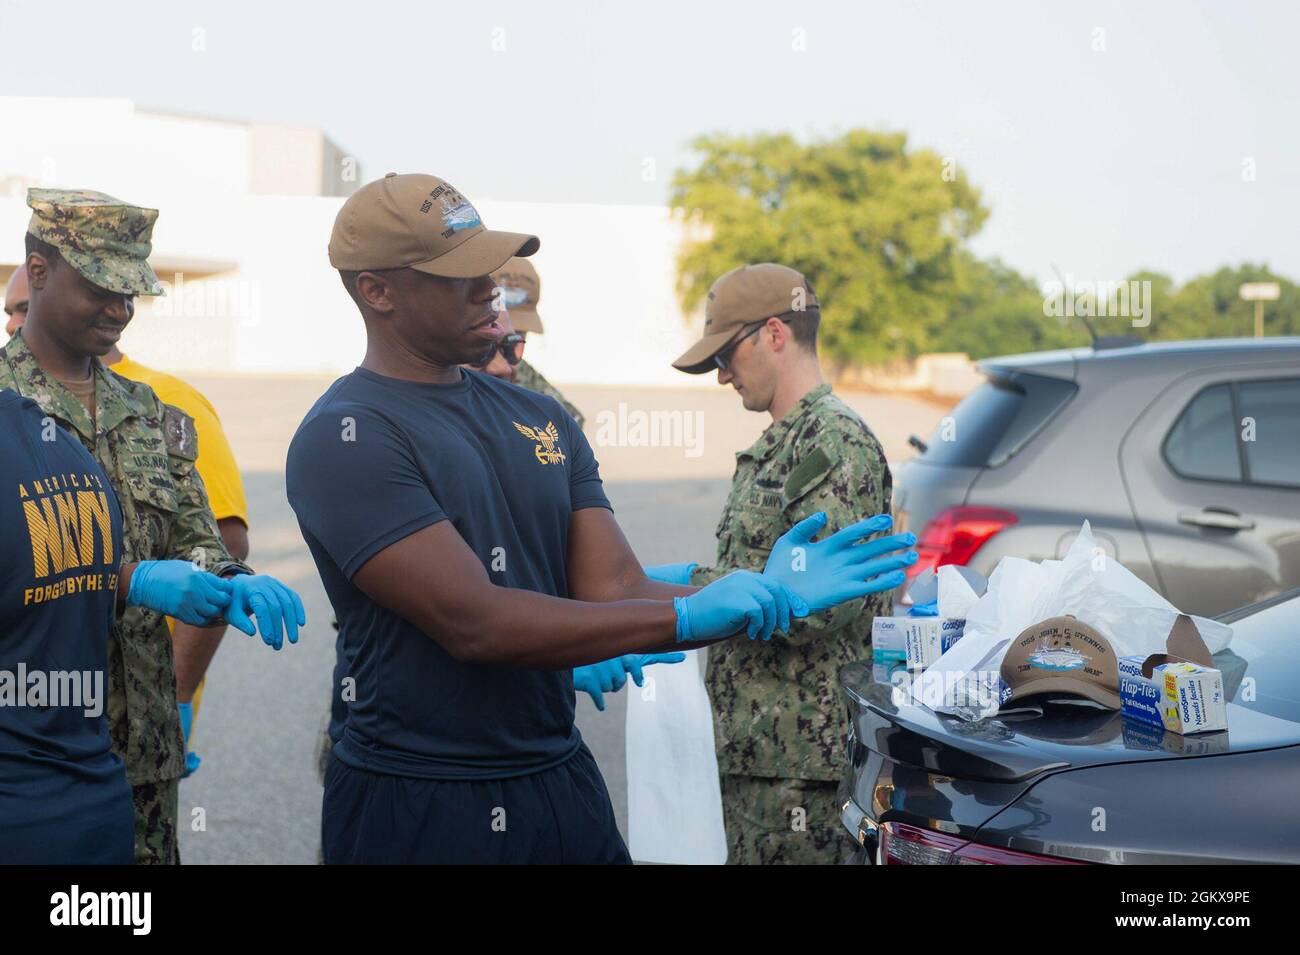 U.S. Navy Aviation Electronics Technician 1st Class Robert Fenwick, center, from Miami, assigned to the aircraft carrier USS John C. Stennis (CVN 74), participates in a first class petty officer association community relations event to pick up trash in the NetCenter parking lot, in Newport News, Virginia, July 16, 2021. John C. Stennis is in Newport News Shipyard working alongside NNS, NAVSEA and contractors conducting Refueling and Complex Overhaul as part of the mission to deliver the warship back in the fight, on time and on budget, to resume its duty of defending the United States. Stock Photo